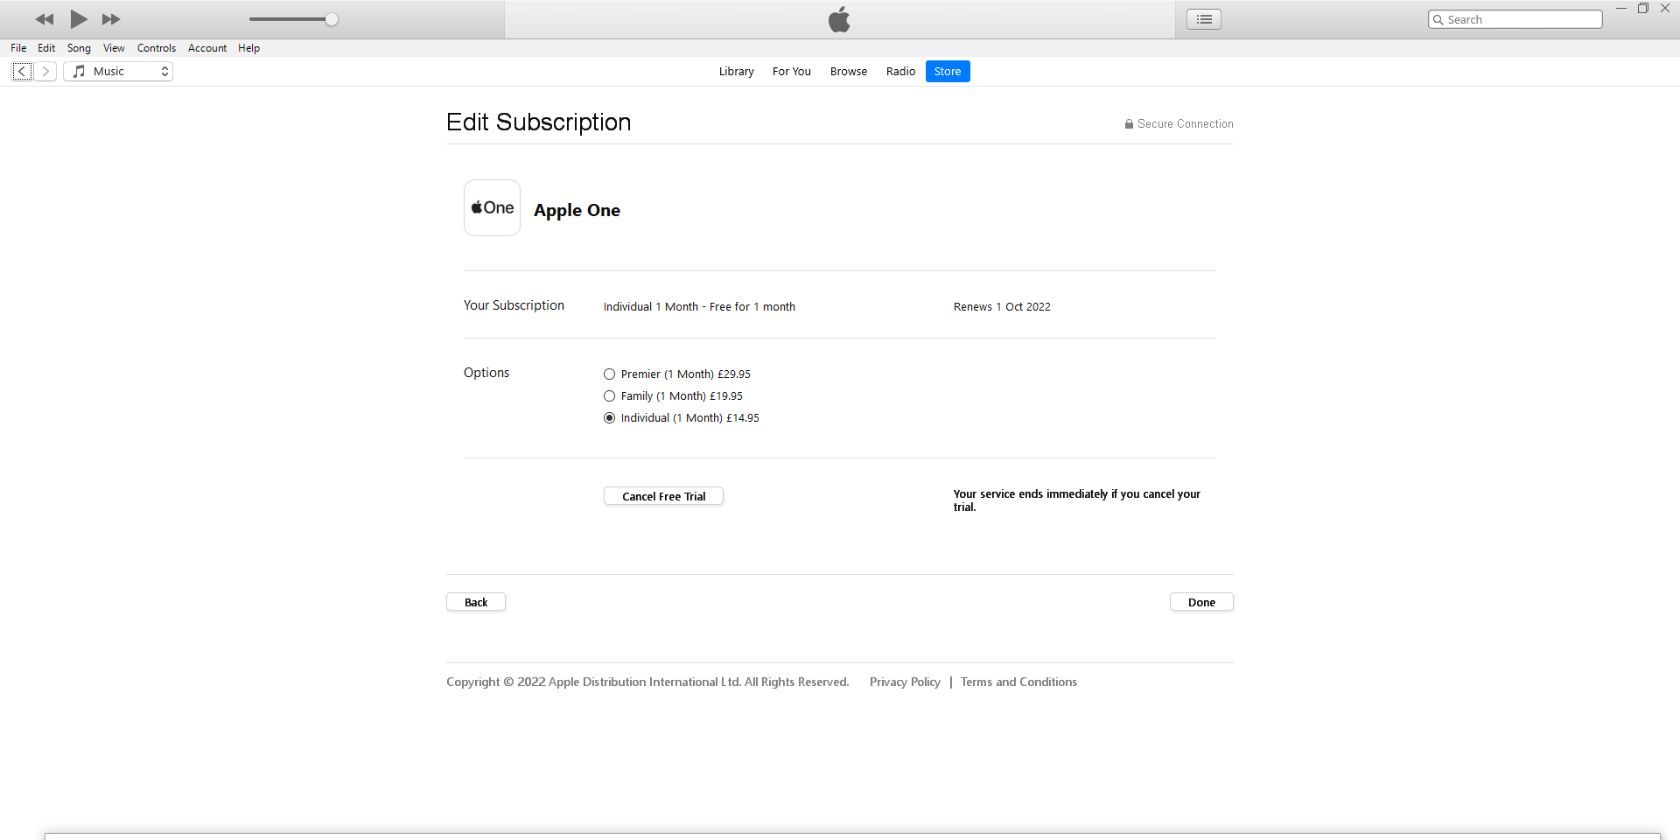 The Manage Subscription page for Apple One on the iTunes app